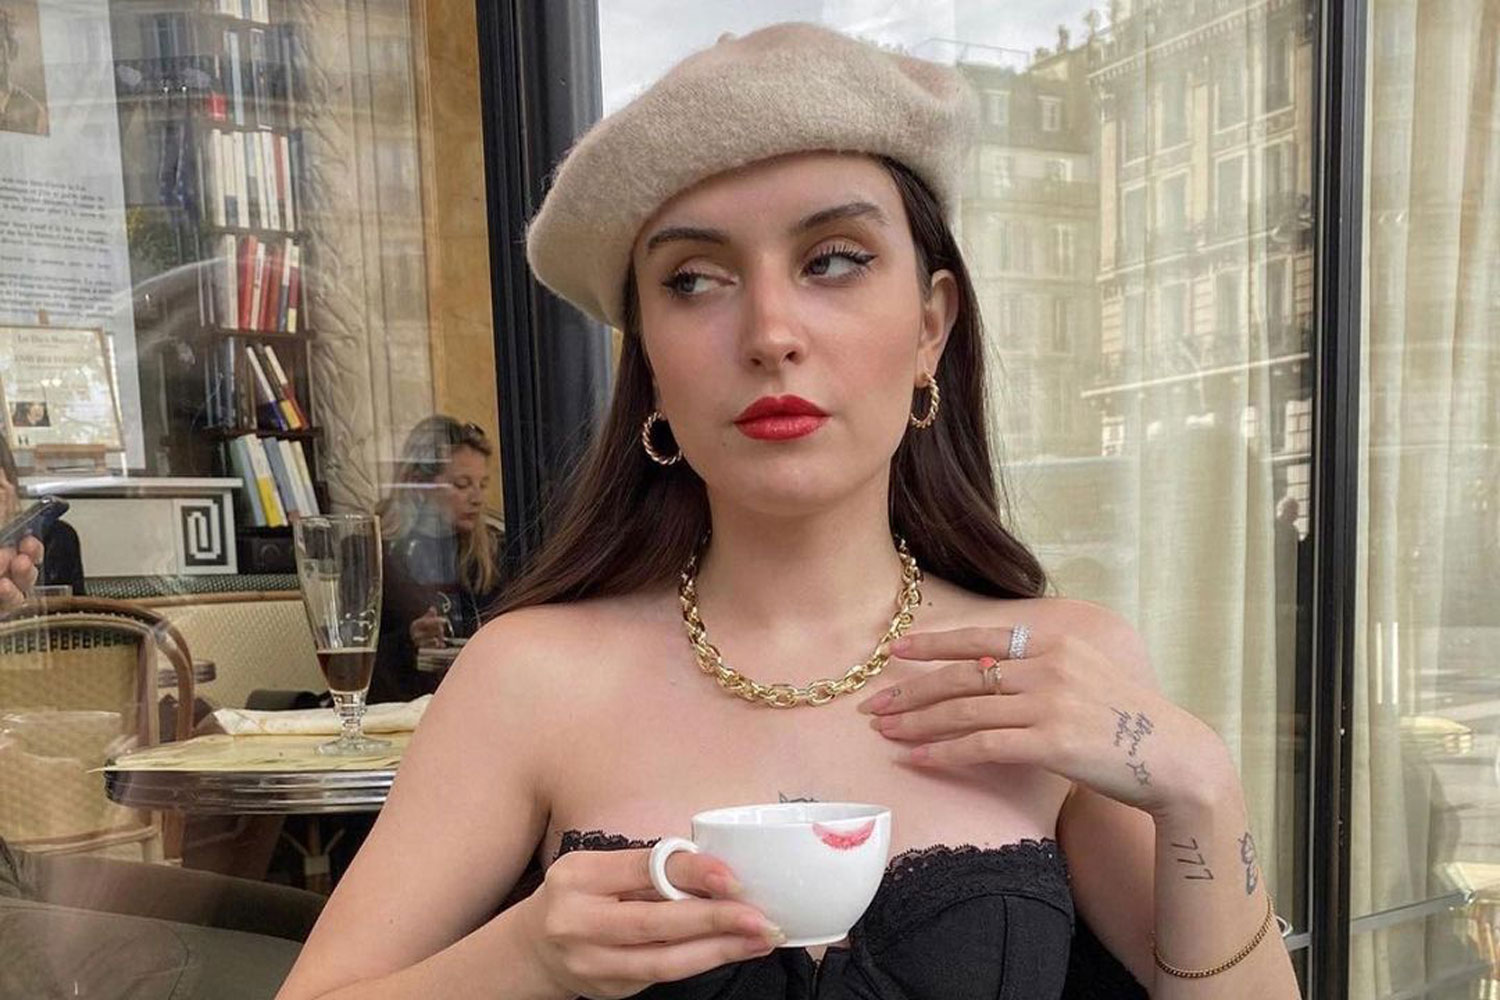 France’s Coffee Is Now So Bad Tourists Are Bringing Moka Pots To Paris